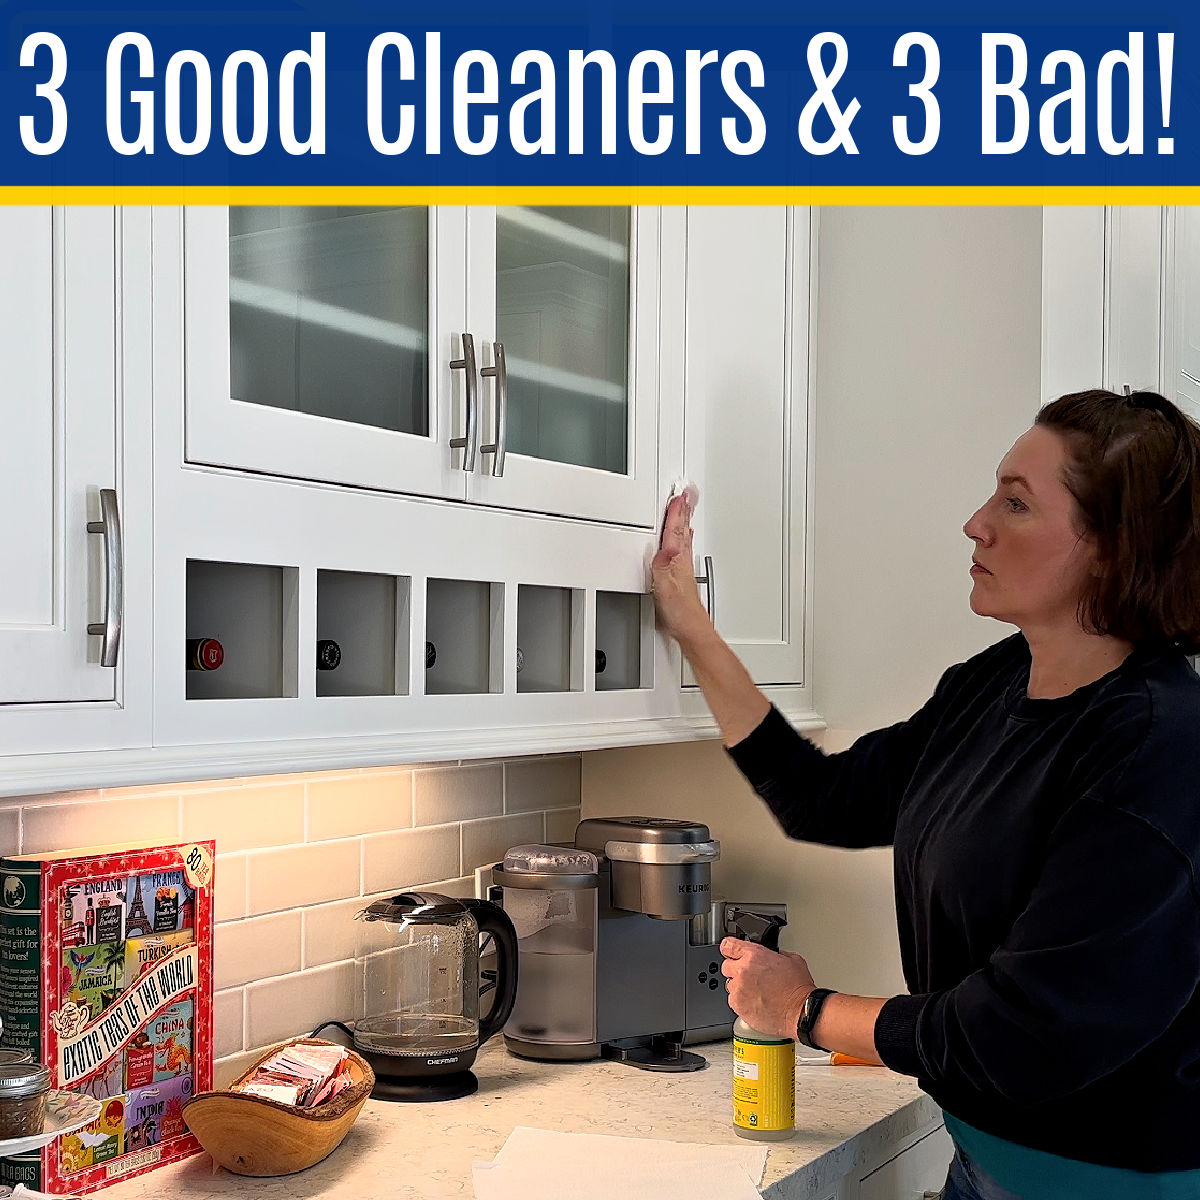 How To Clean White Kitchen Cabinets: 3 Best Ways & 3 To Avoid